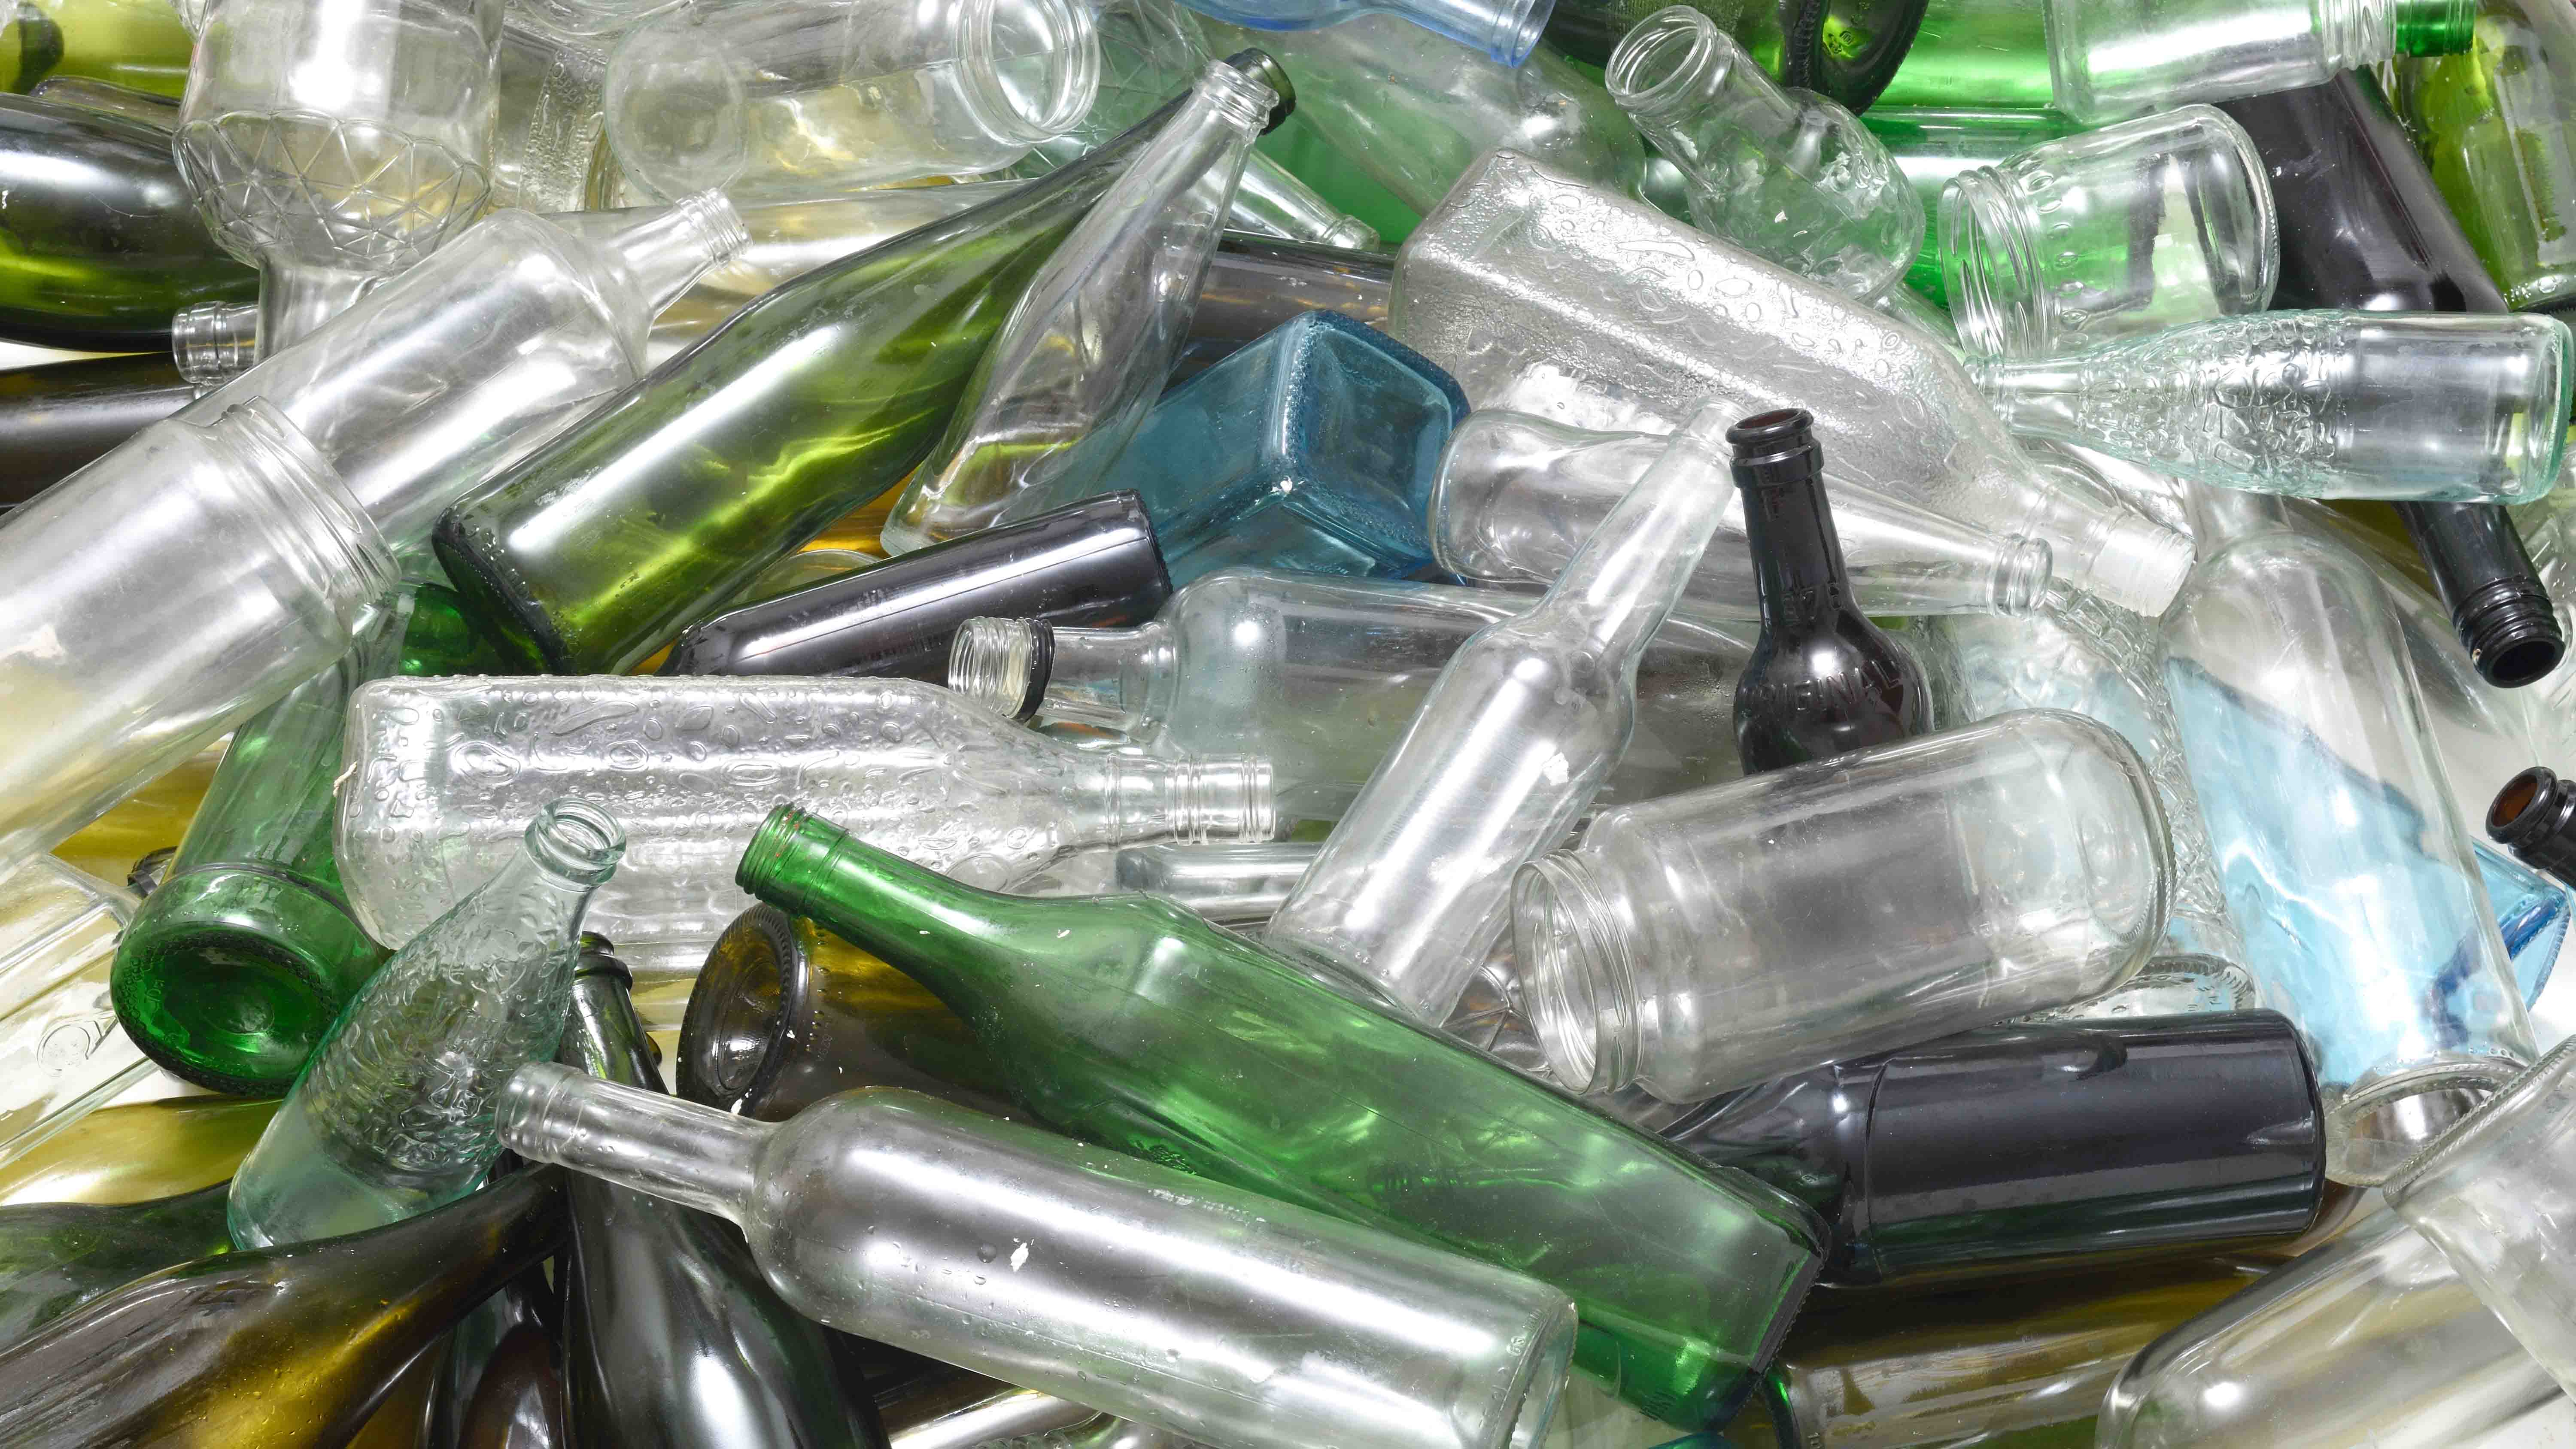 Glass collection decision should wait for more Government direction